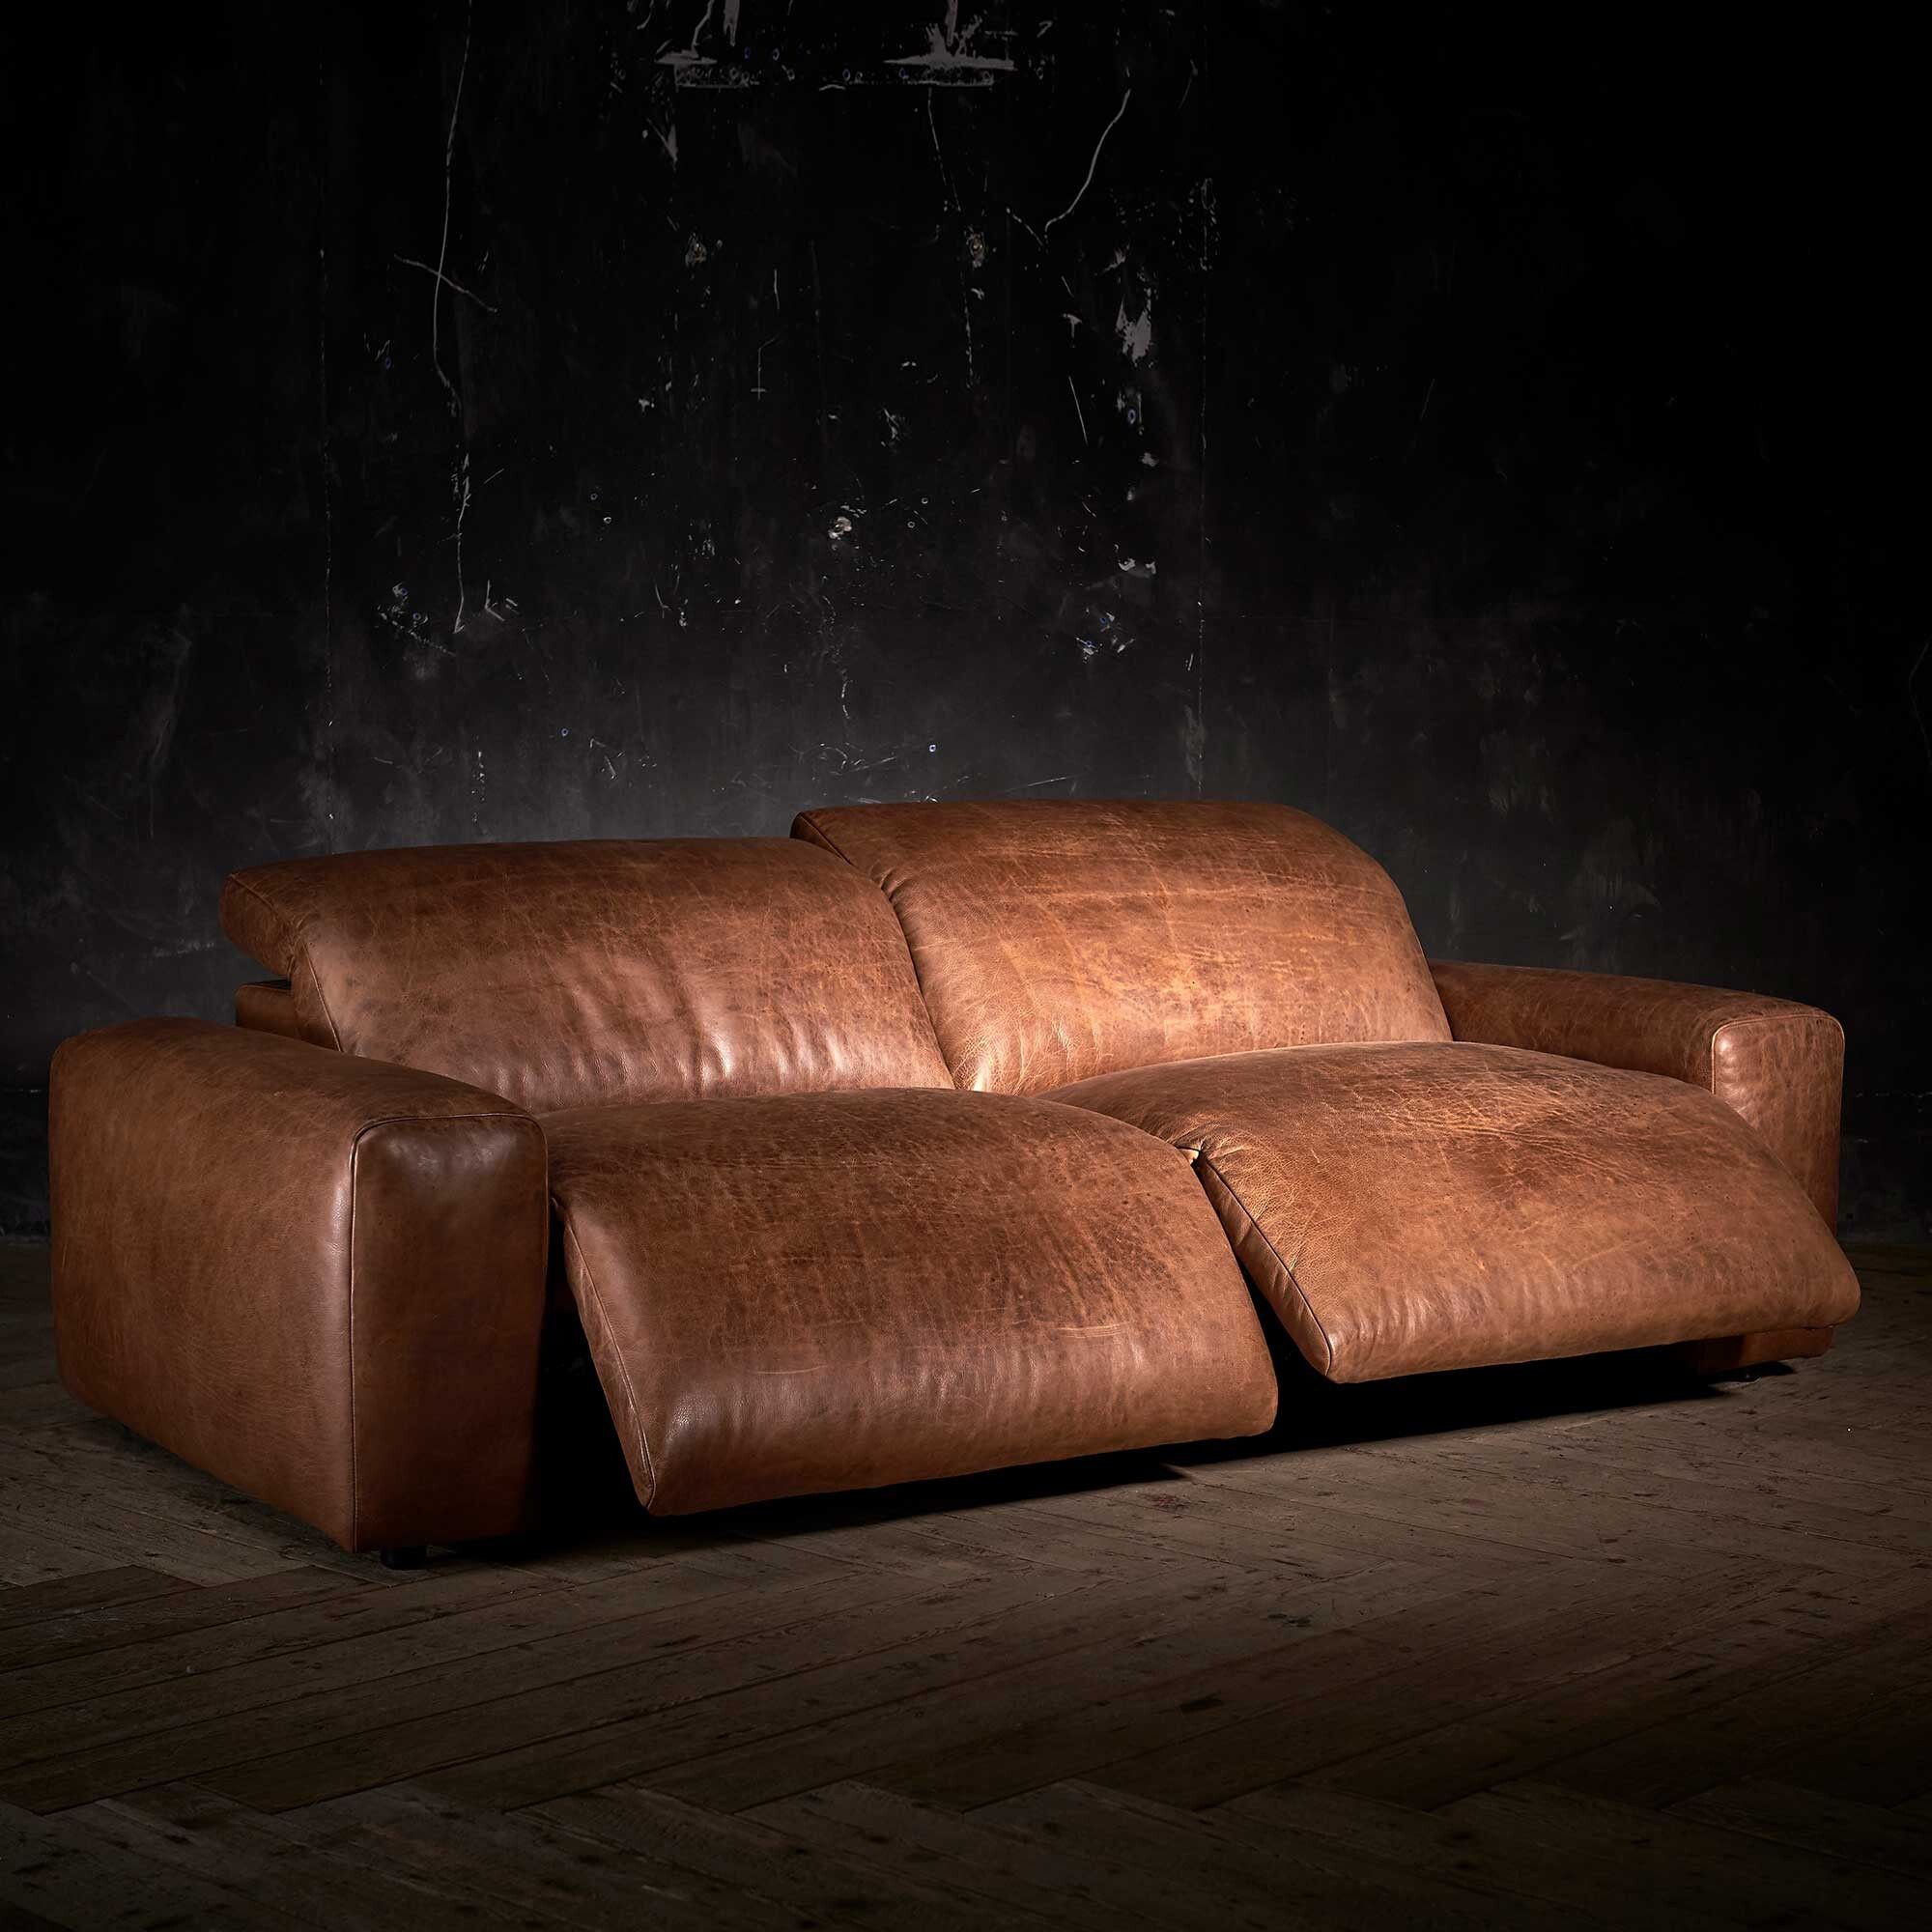 Contemporary 3 seater recliner
leather  sofa – worth to spend money on
it